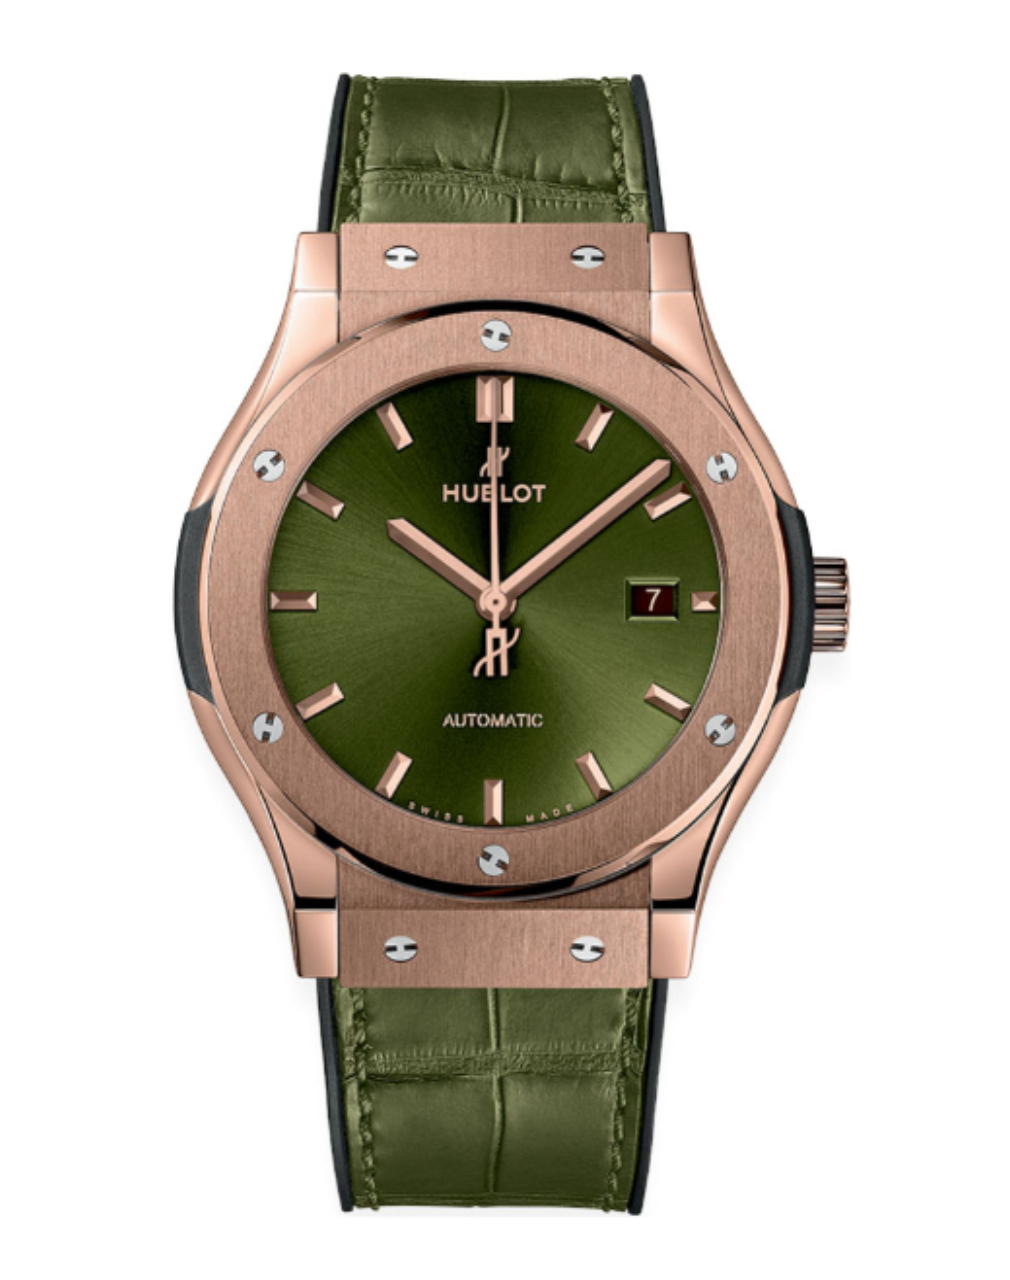 Classic Fusion King Gold Green 42mm 542.OX.8980.LR